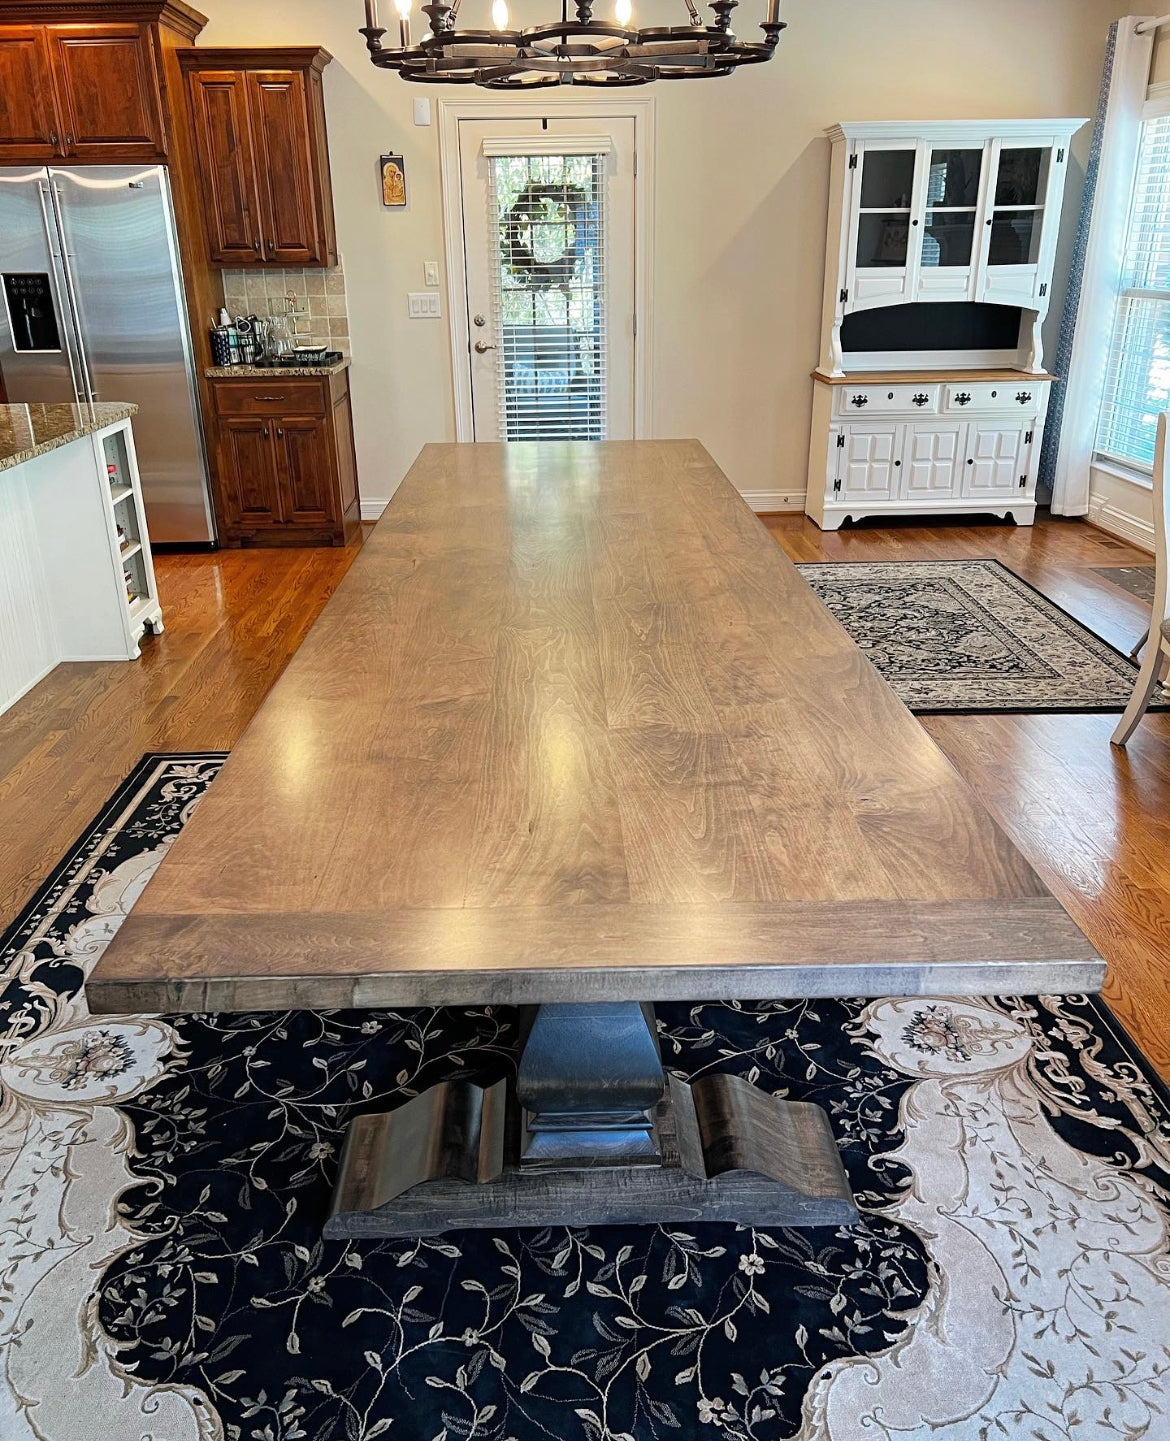 Pictured with a 12' L x 42" W Hard Maple table with 5" Breadboards stained in Expresso.